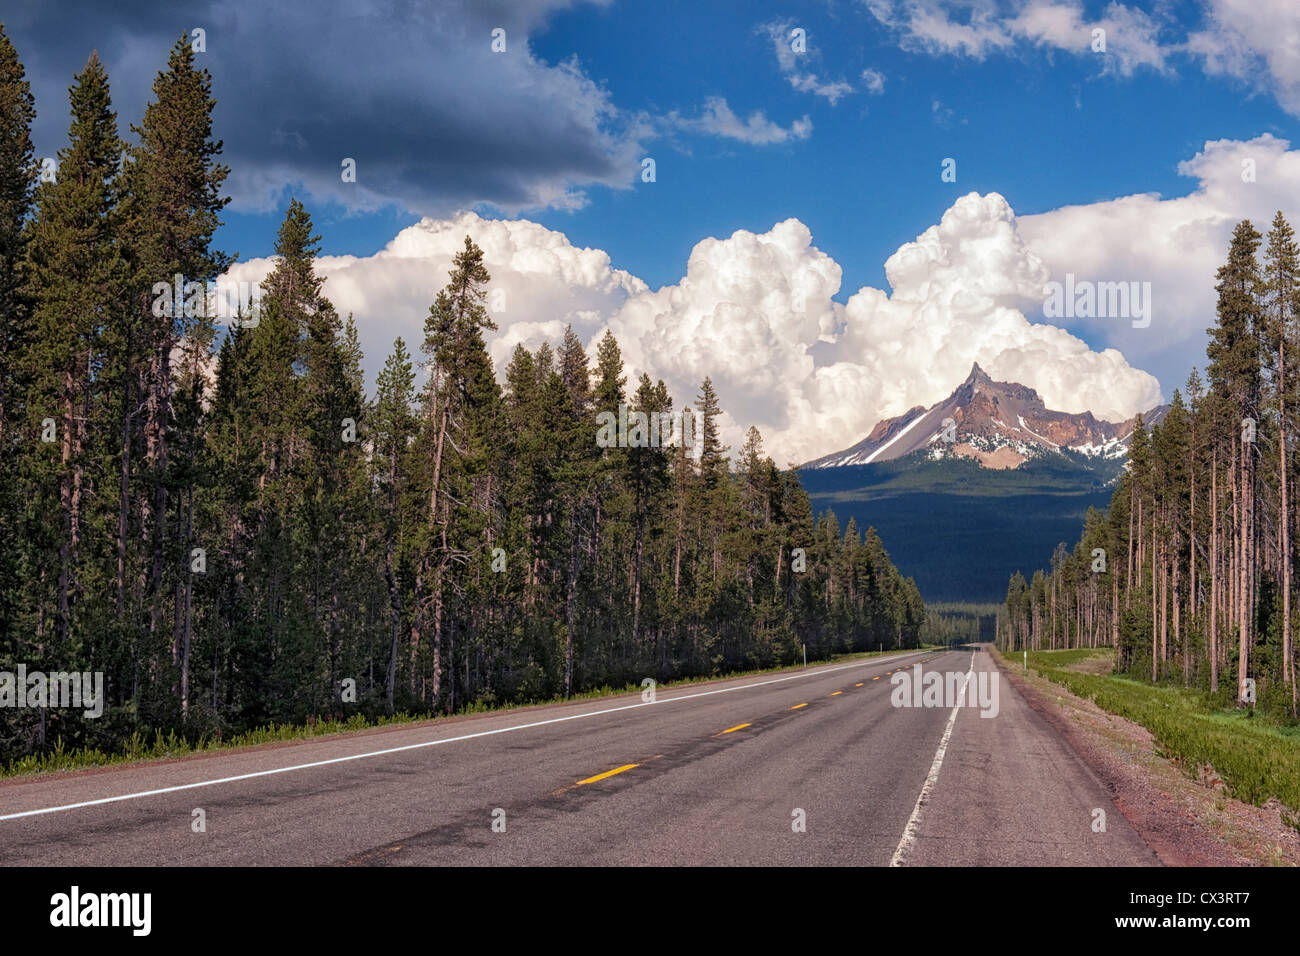 The Rogue Umpqua Scenic Byway offers outstanding views of southern Oregon’s Mt Thielsen as afternoon thunderheads pass overhead. Stock Photo